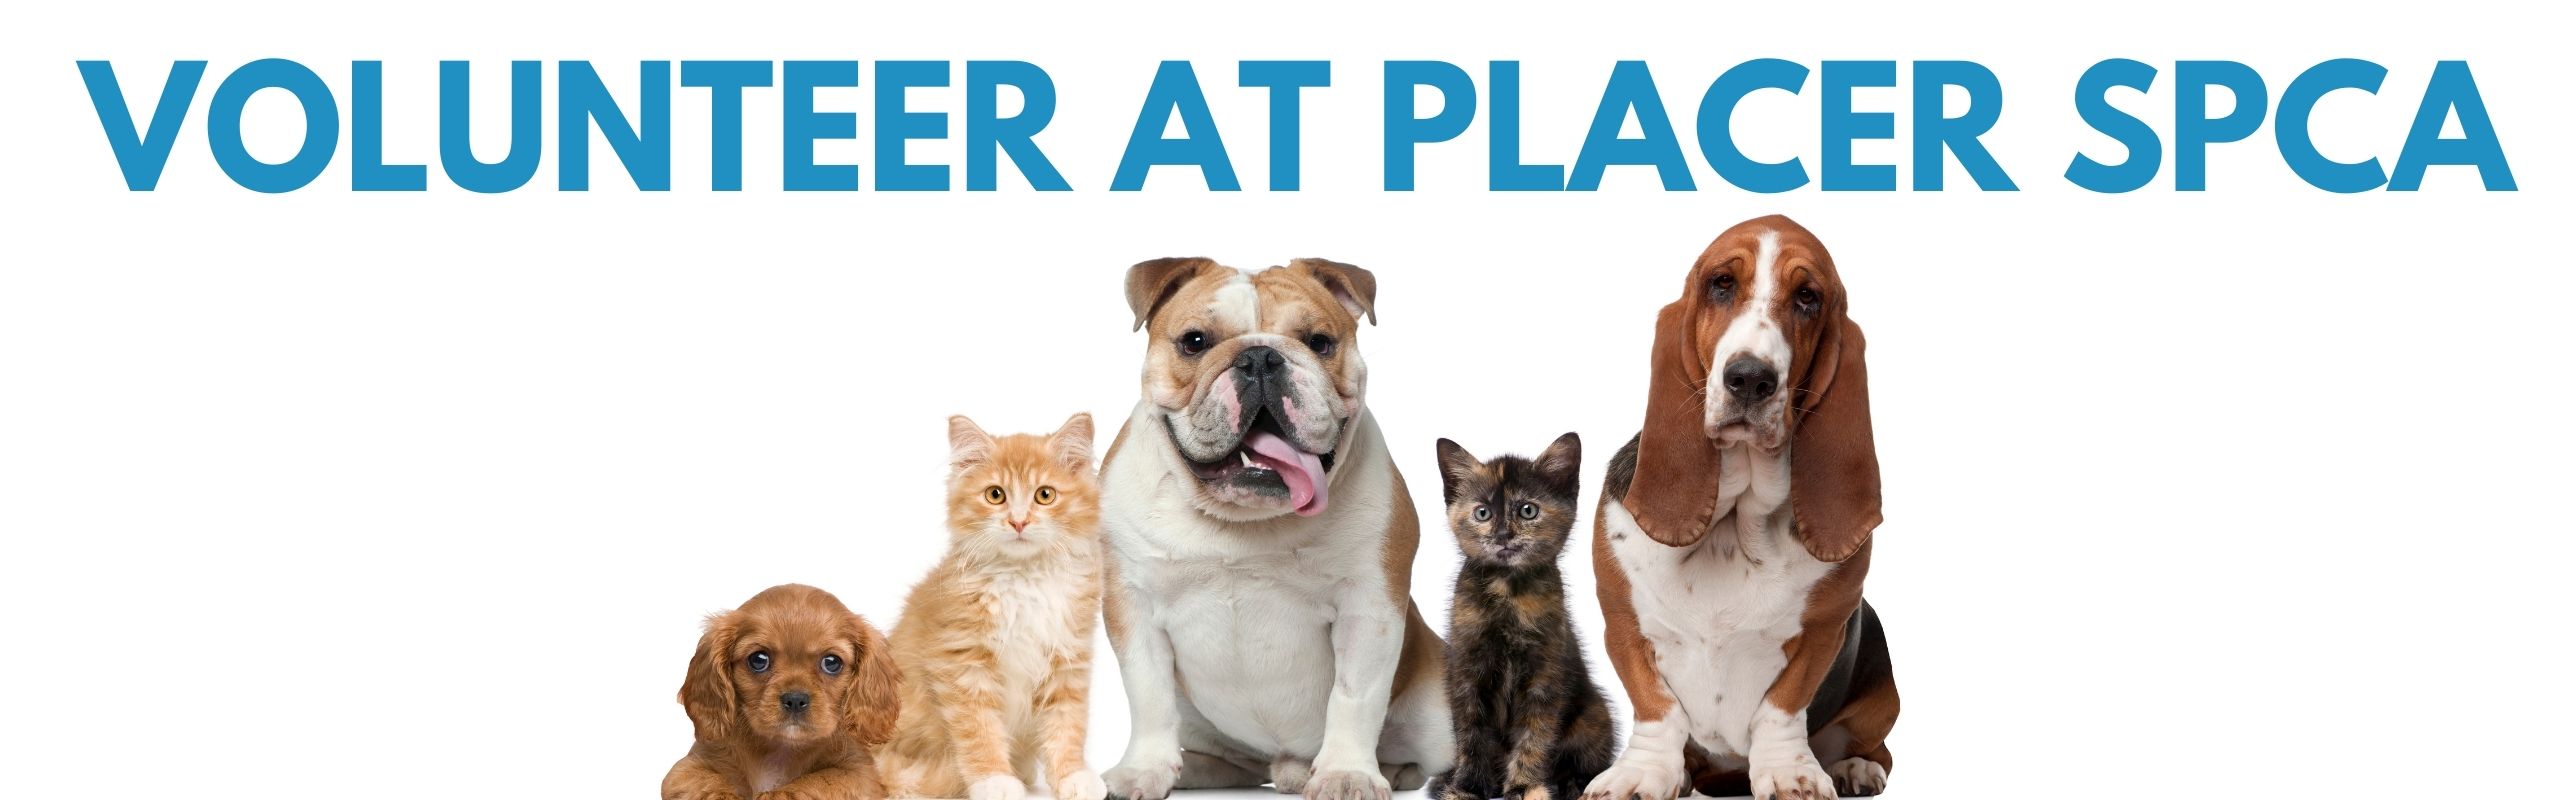 Placer SPCA - Become a volunteer and help animals in need